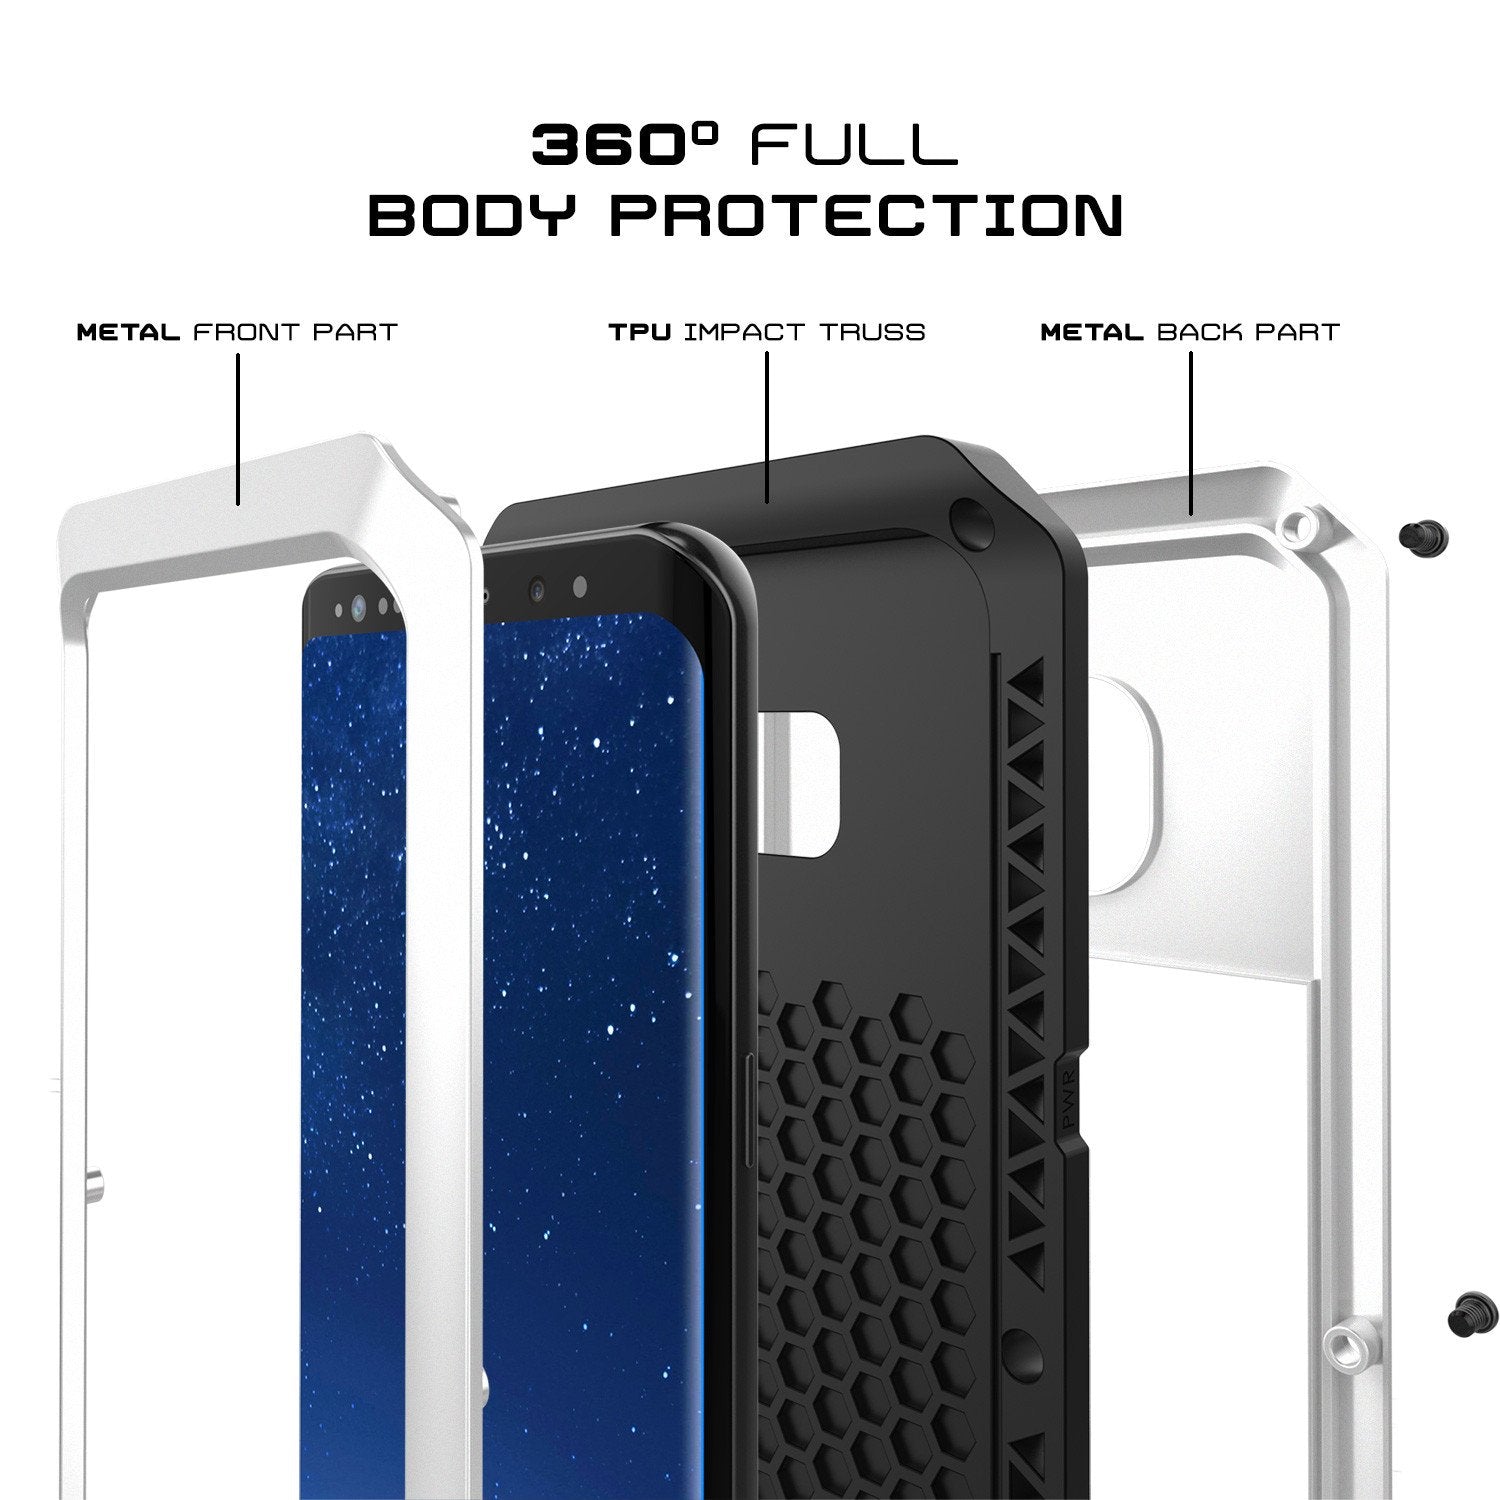 Galaxy S8+ Plus Metal Case, Heavy Duty Military Grade Rugged Armor Cover [shock proof] W/ Prime Drop Protection [WHITE]